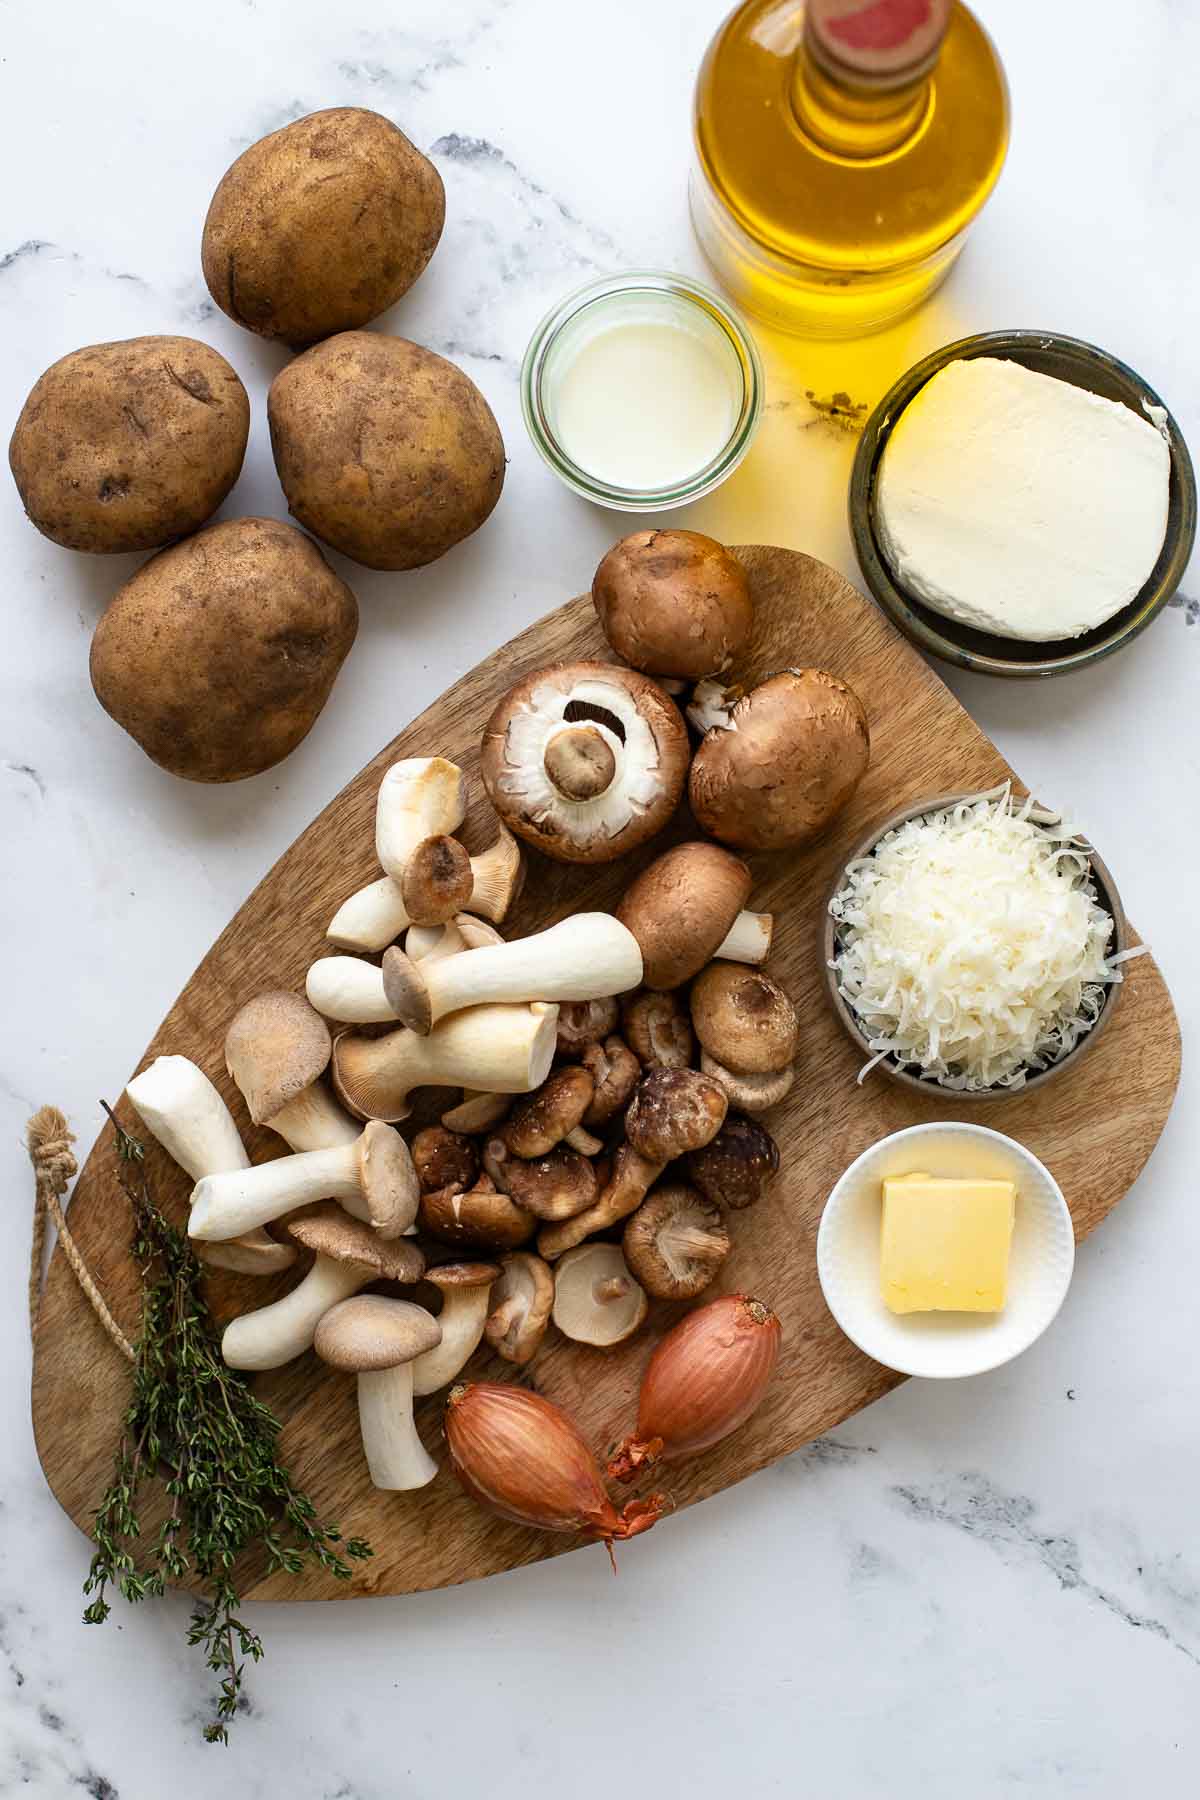 Ingredients for Potato and Mushroom Gratin with Goat’s Cheese